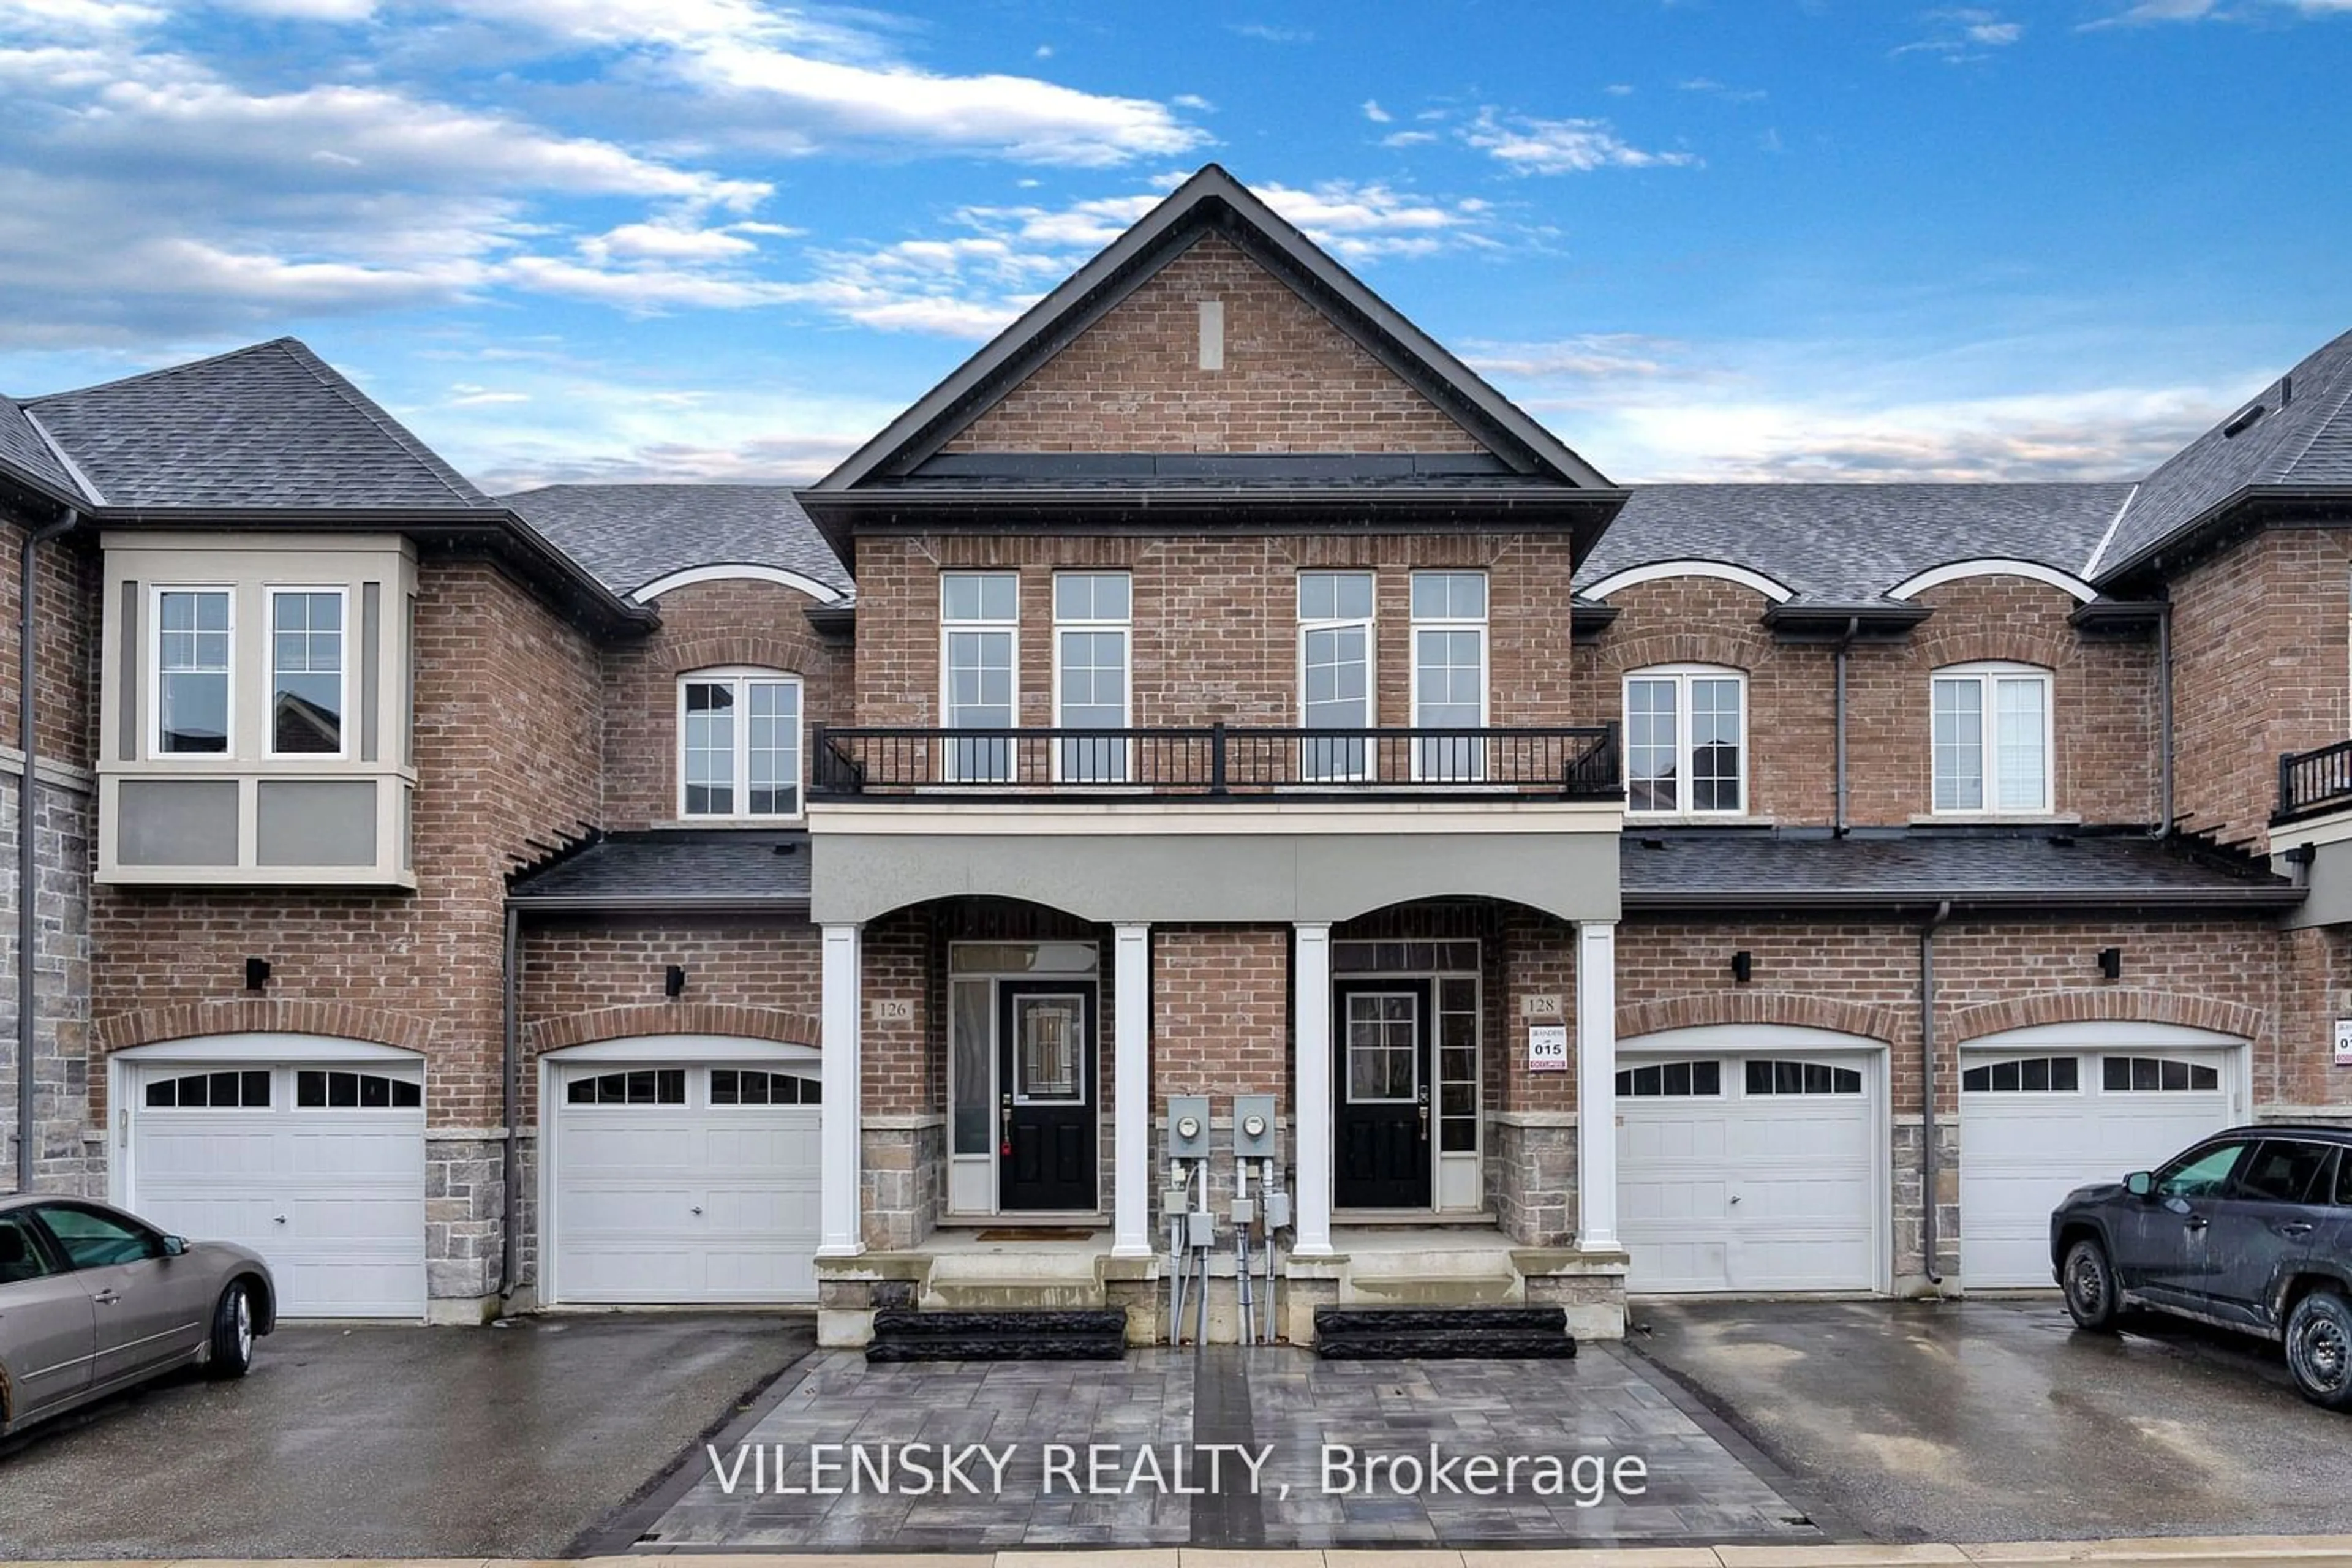 Home with brick exterior material for 126 Maguire Rd, Newmarket Ontario L3X 0M1